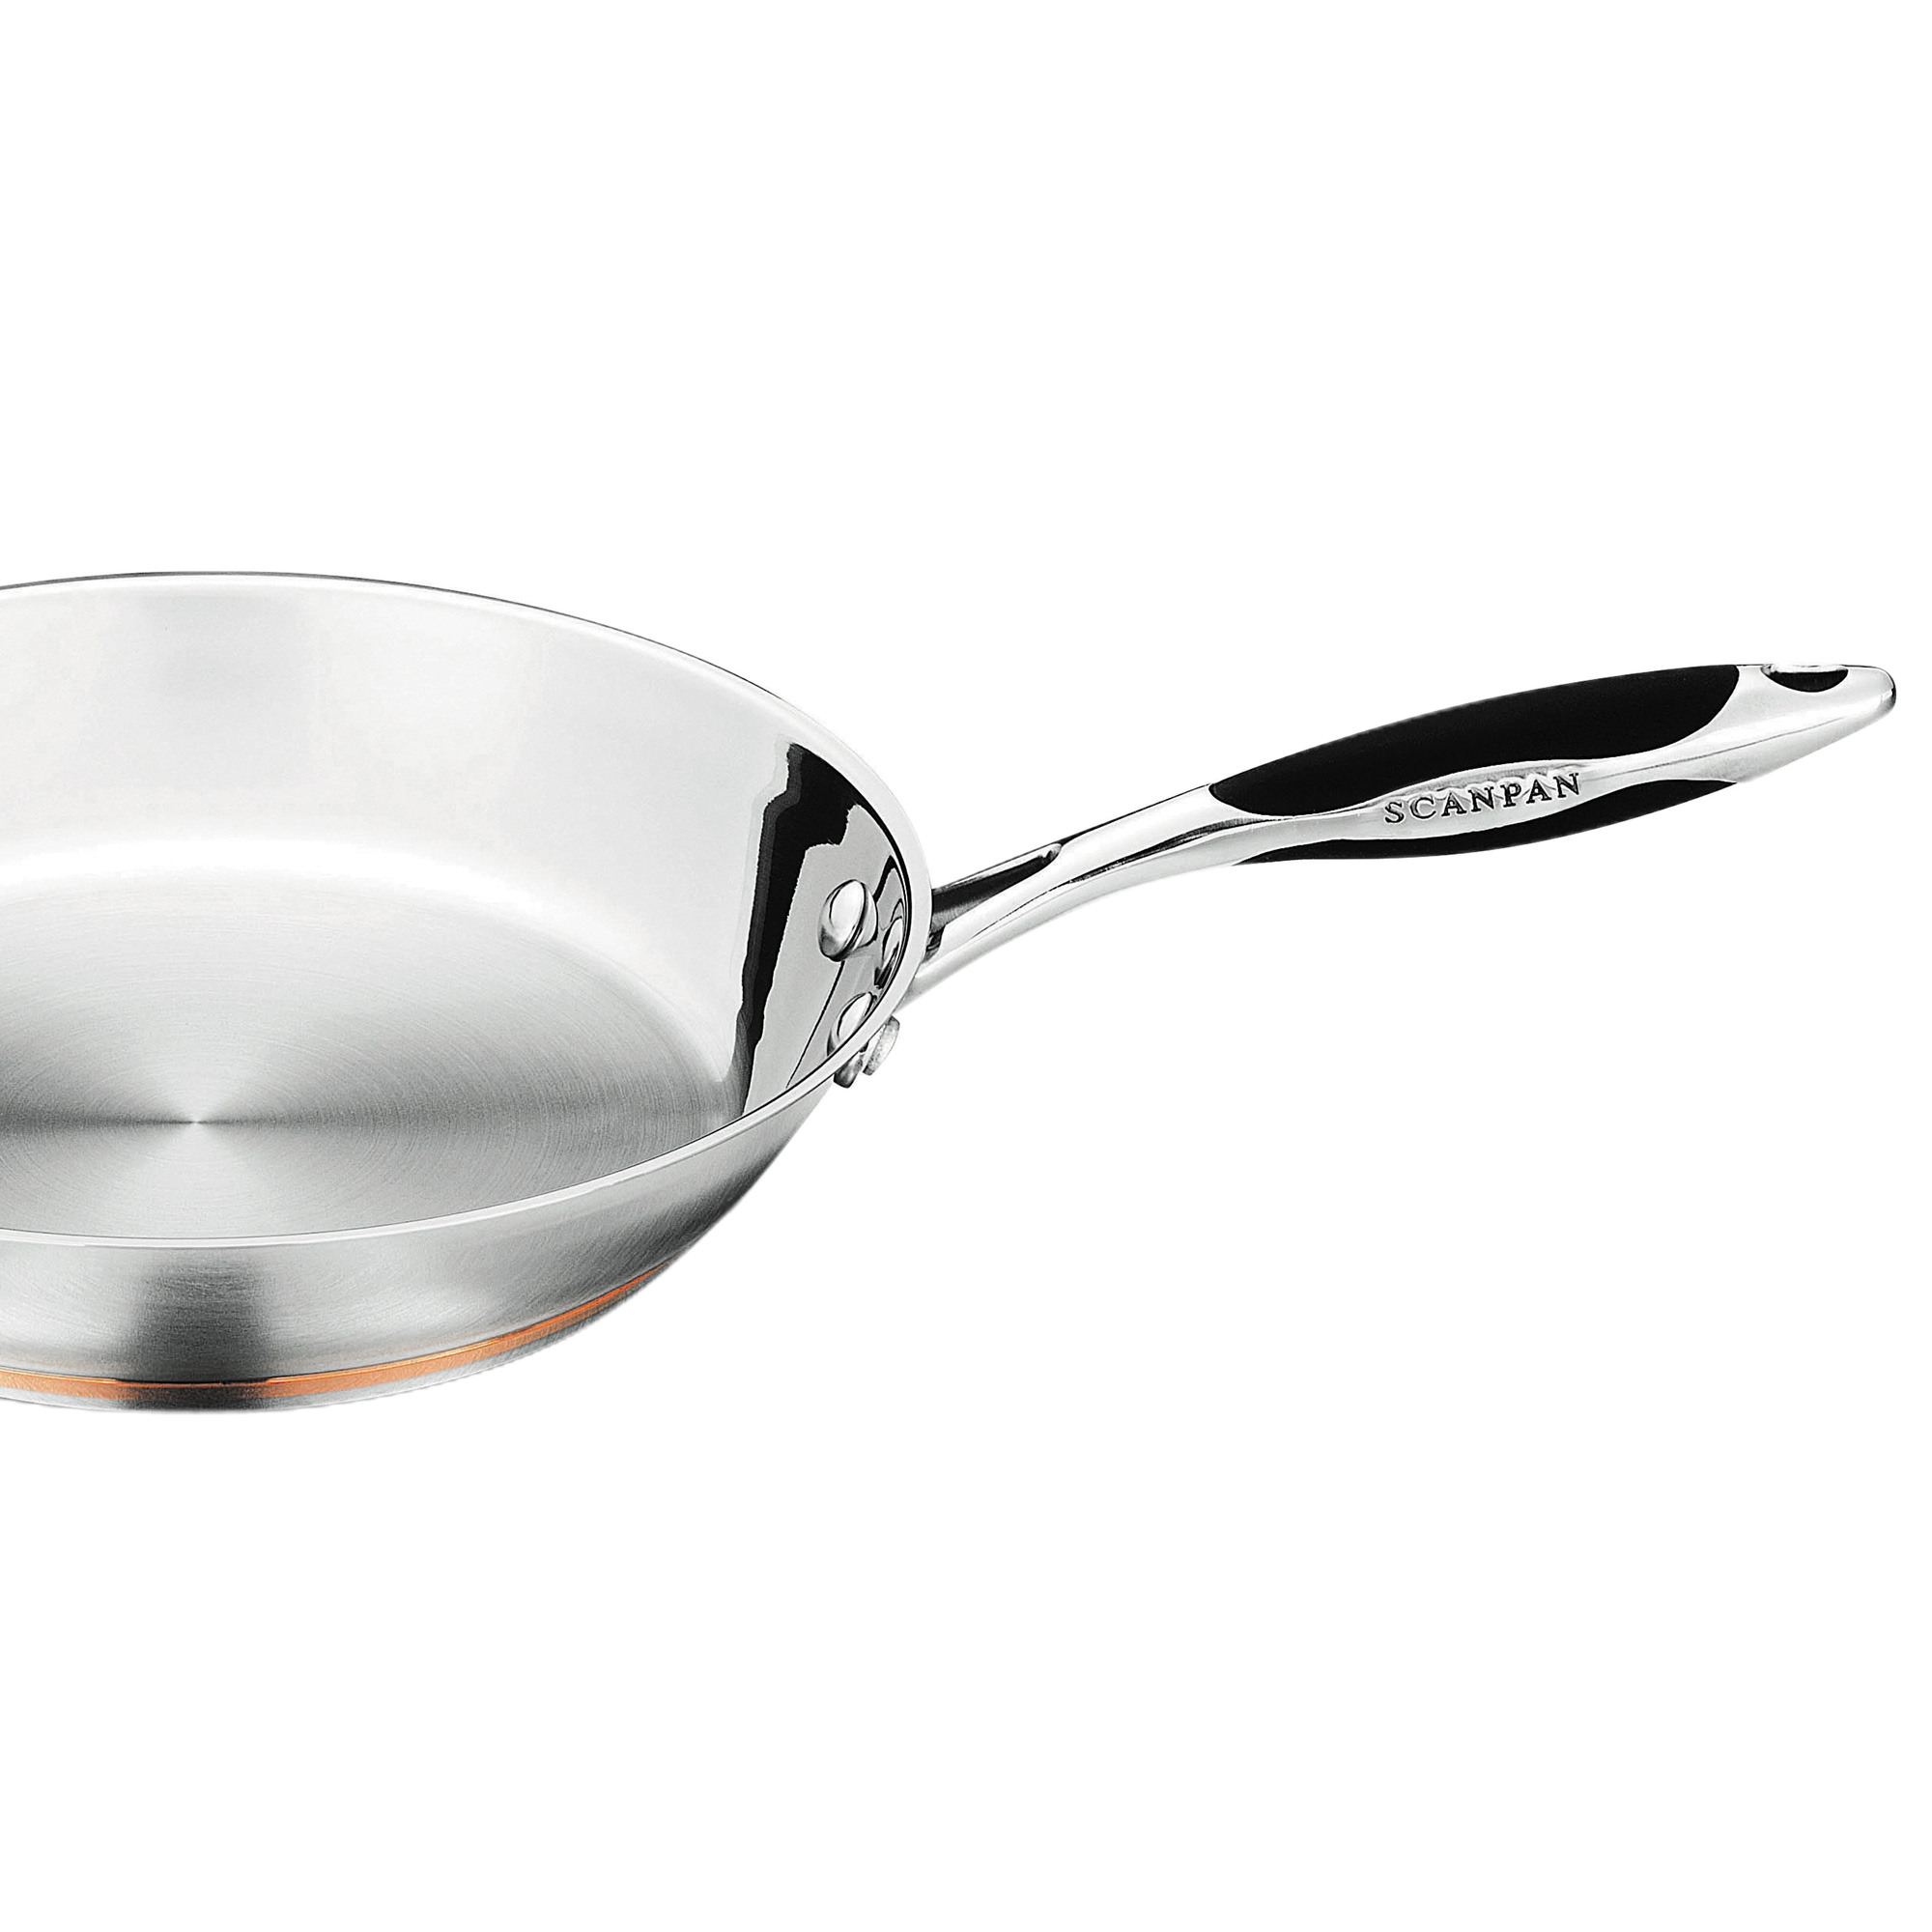 Scanpan Coppernox Stainless Steel Frypan 28cm Image 2